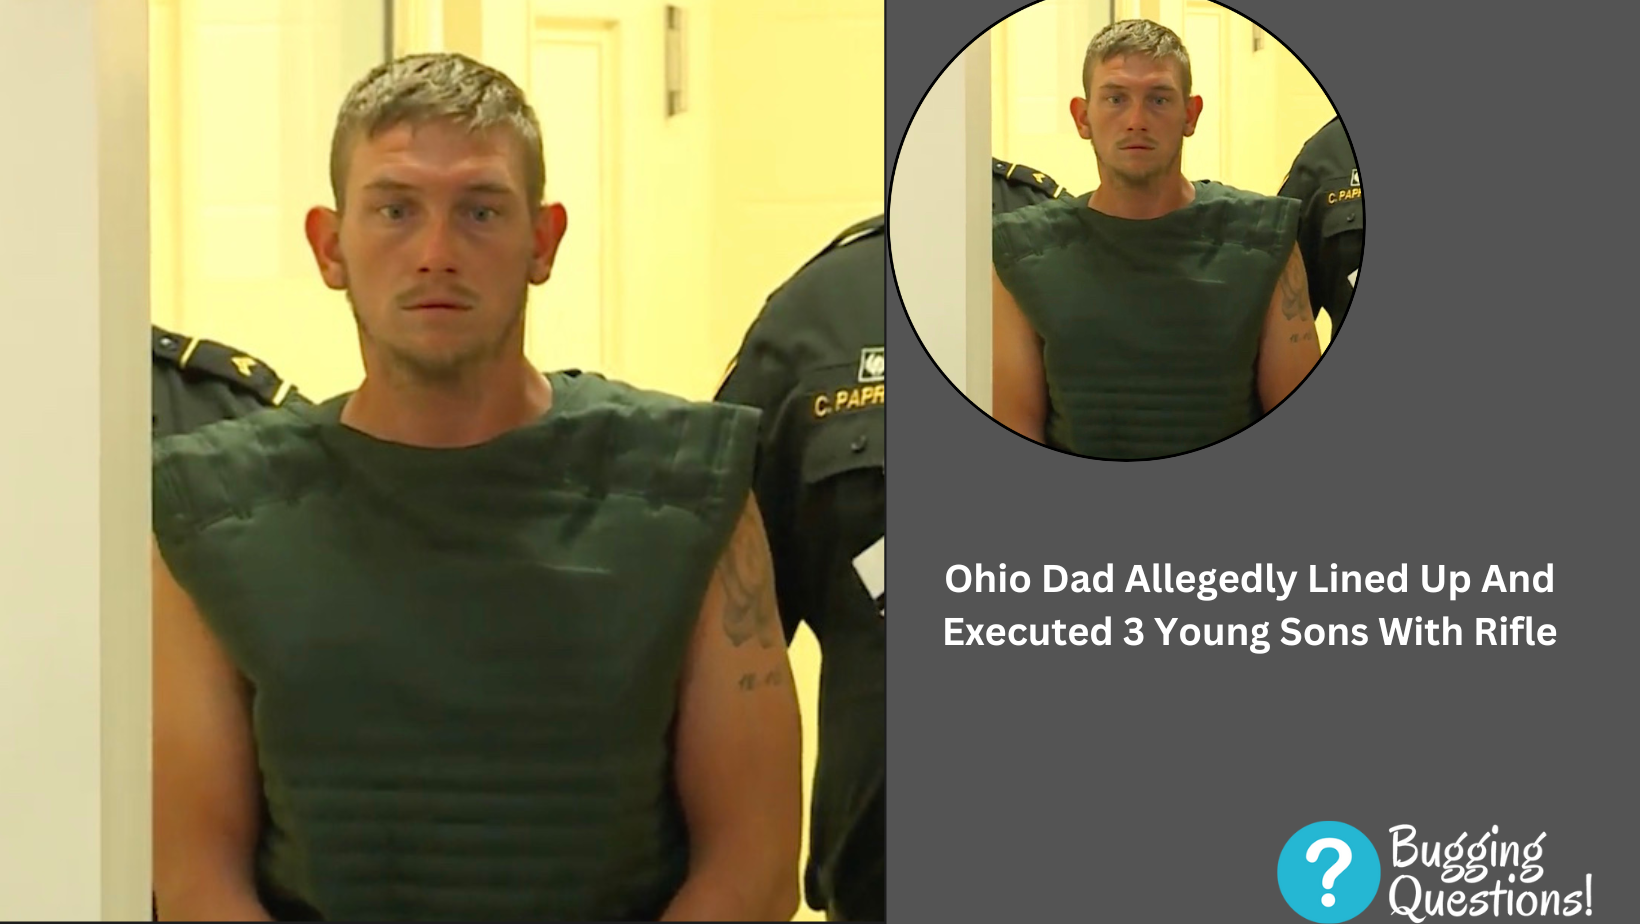 Ohio Dad Allegedly Lined Up And Executed 3 Young Sons With Rifle